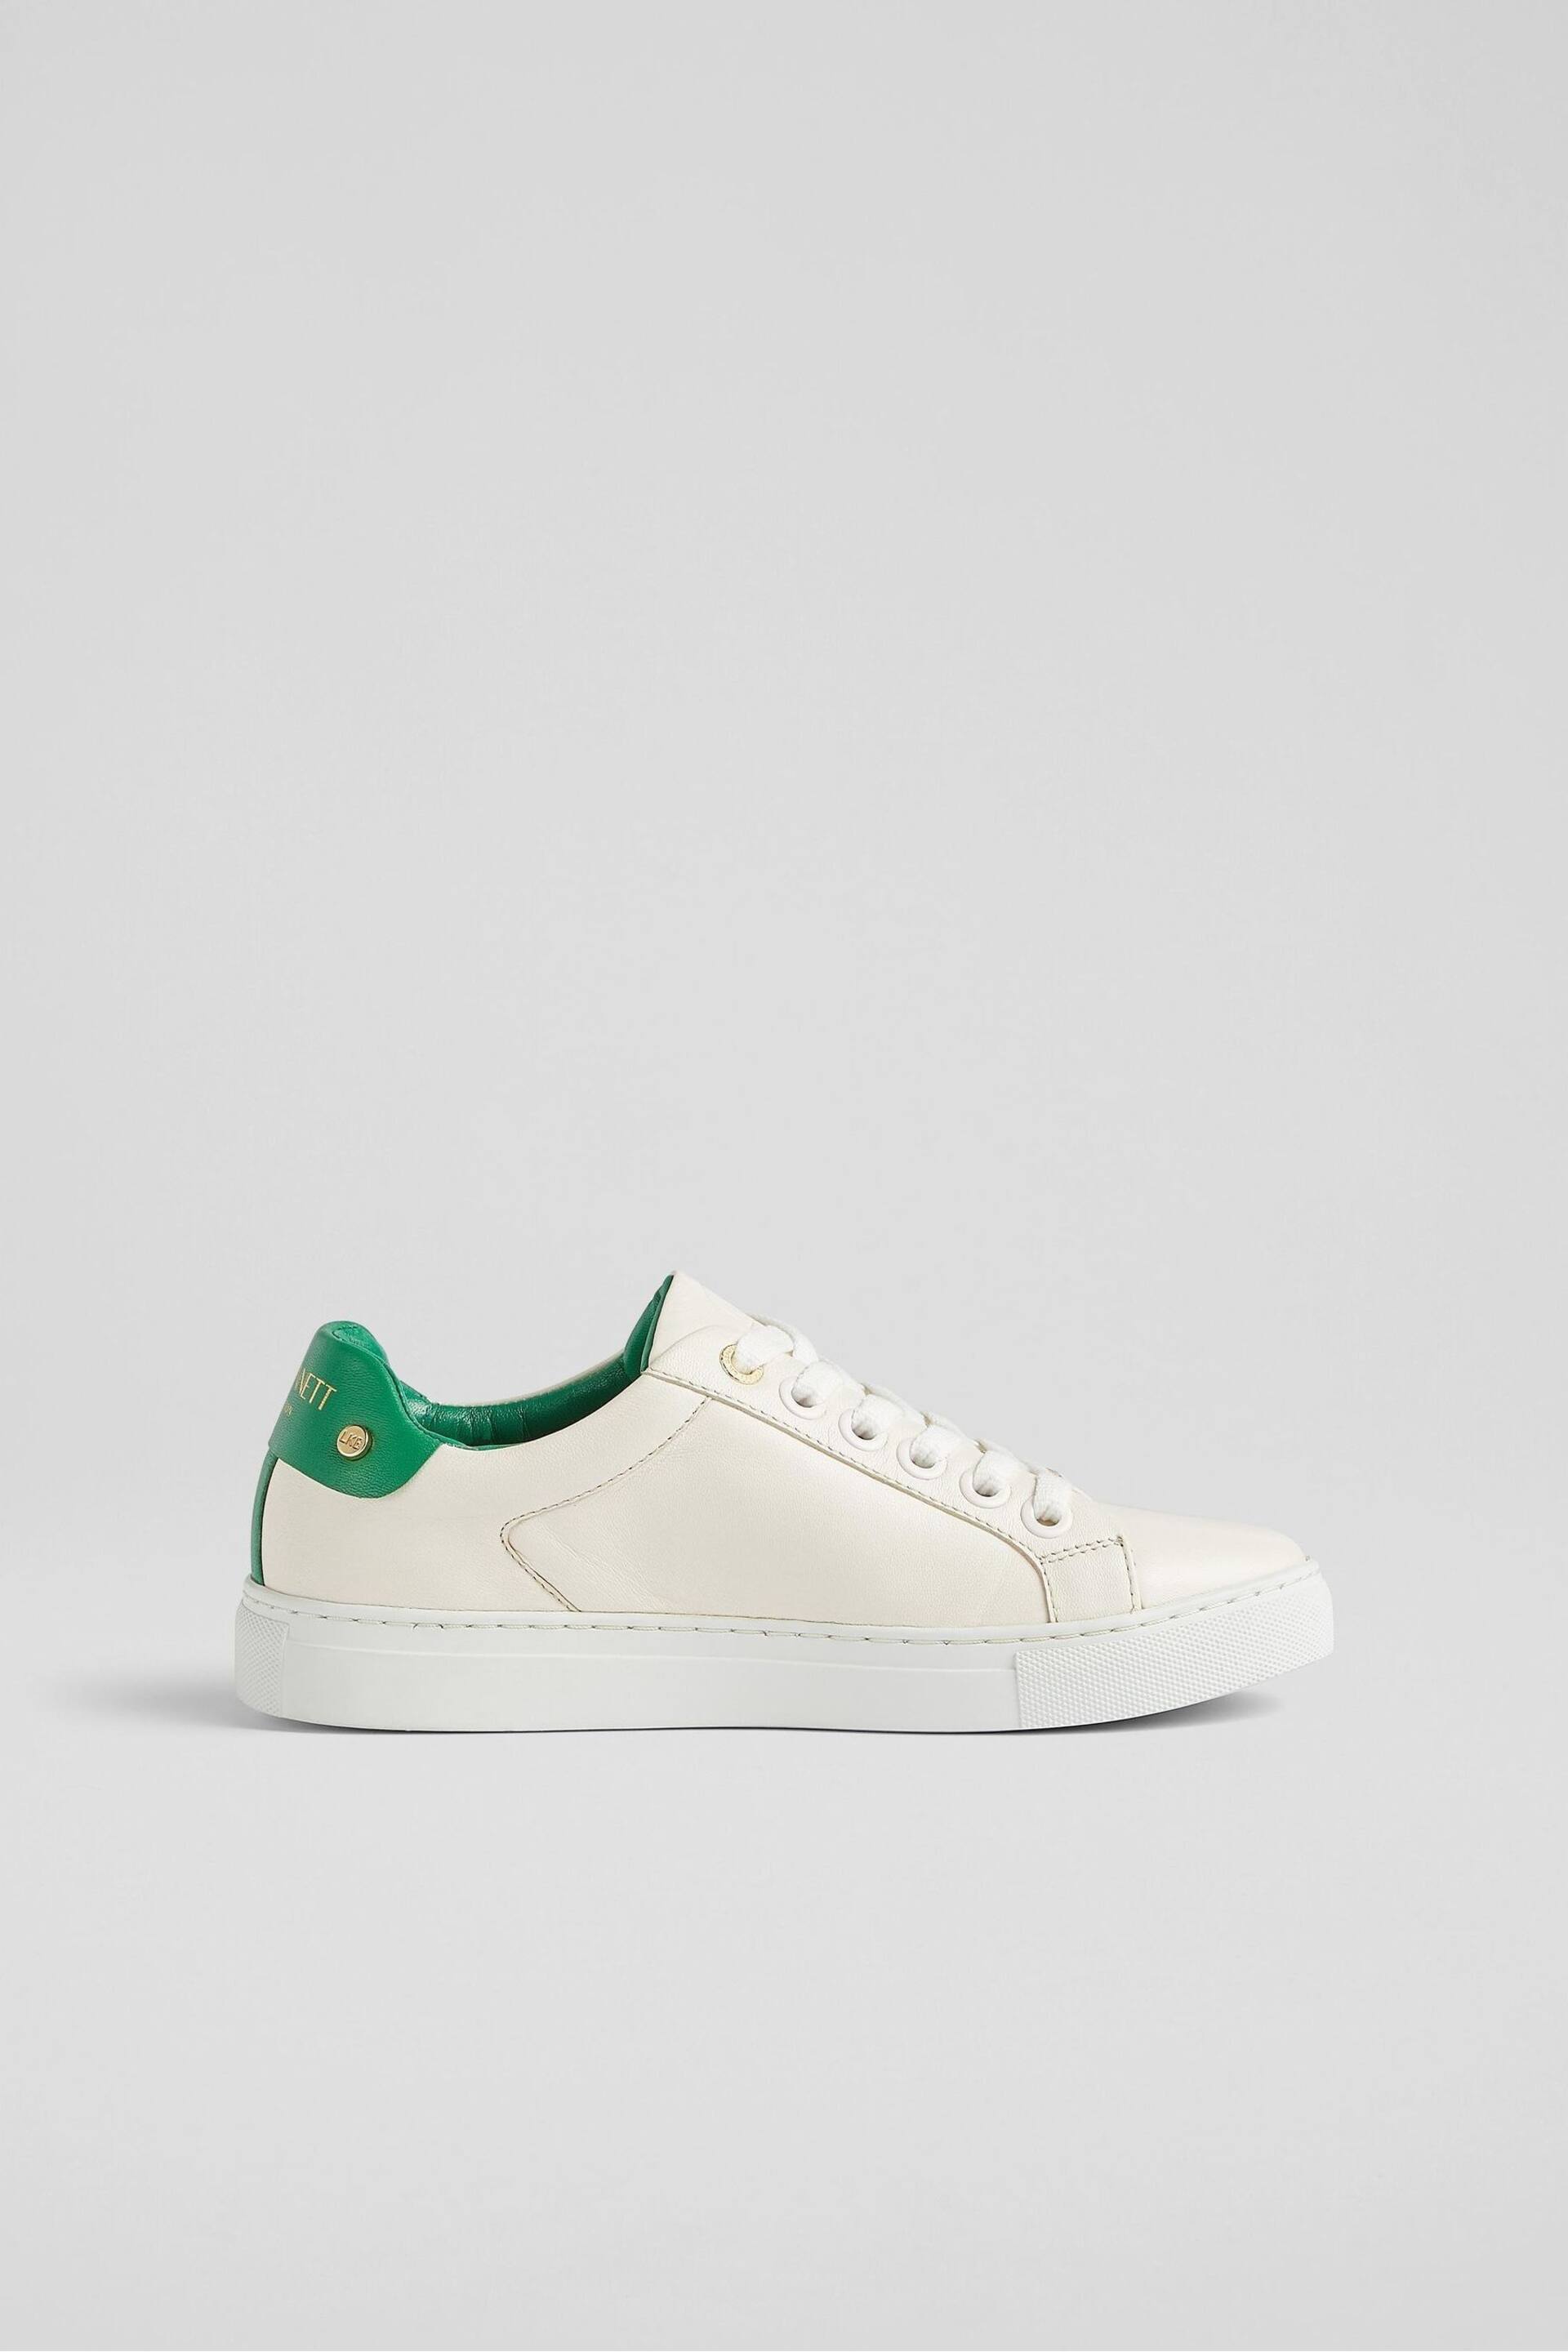 LK Bennett Signature Leather Trainers - Image 6 of 7